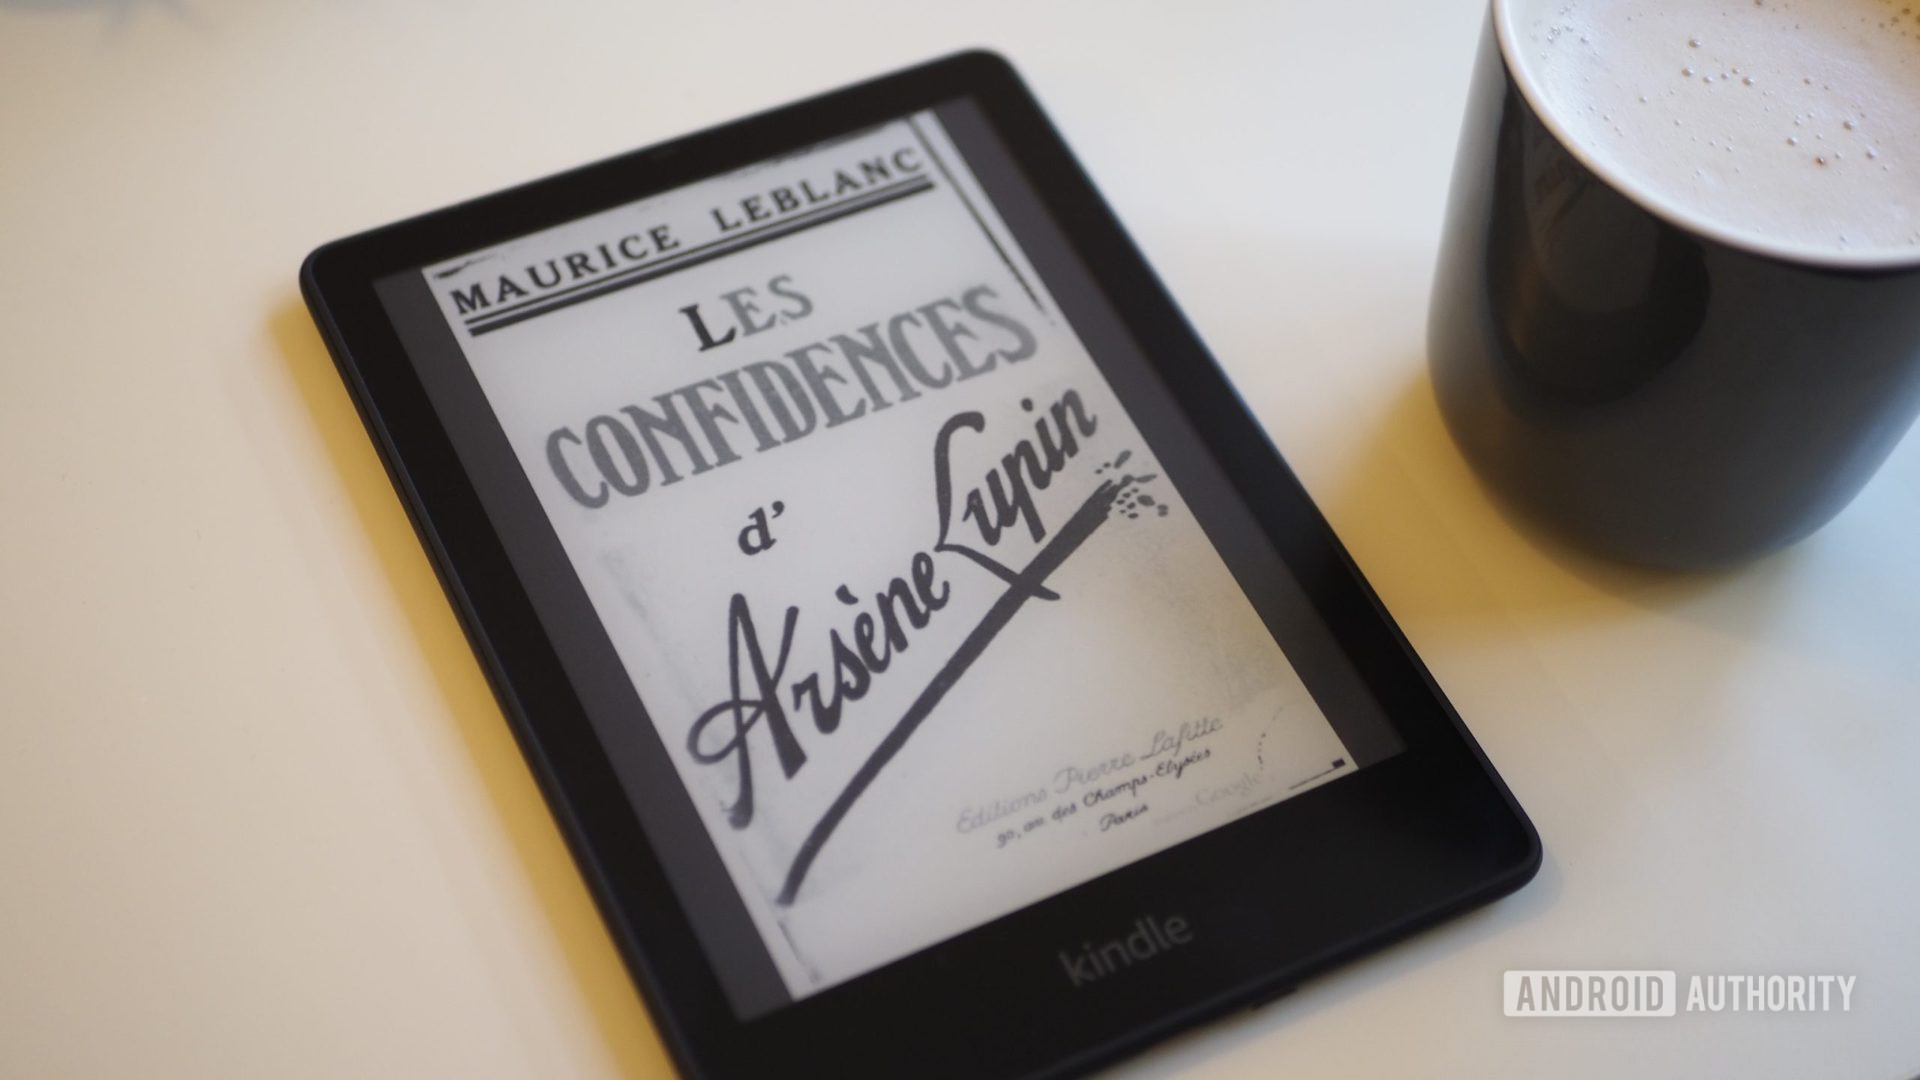 Kindle Paperwhite (2021) review: USB-C is only half the story